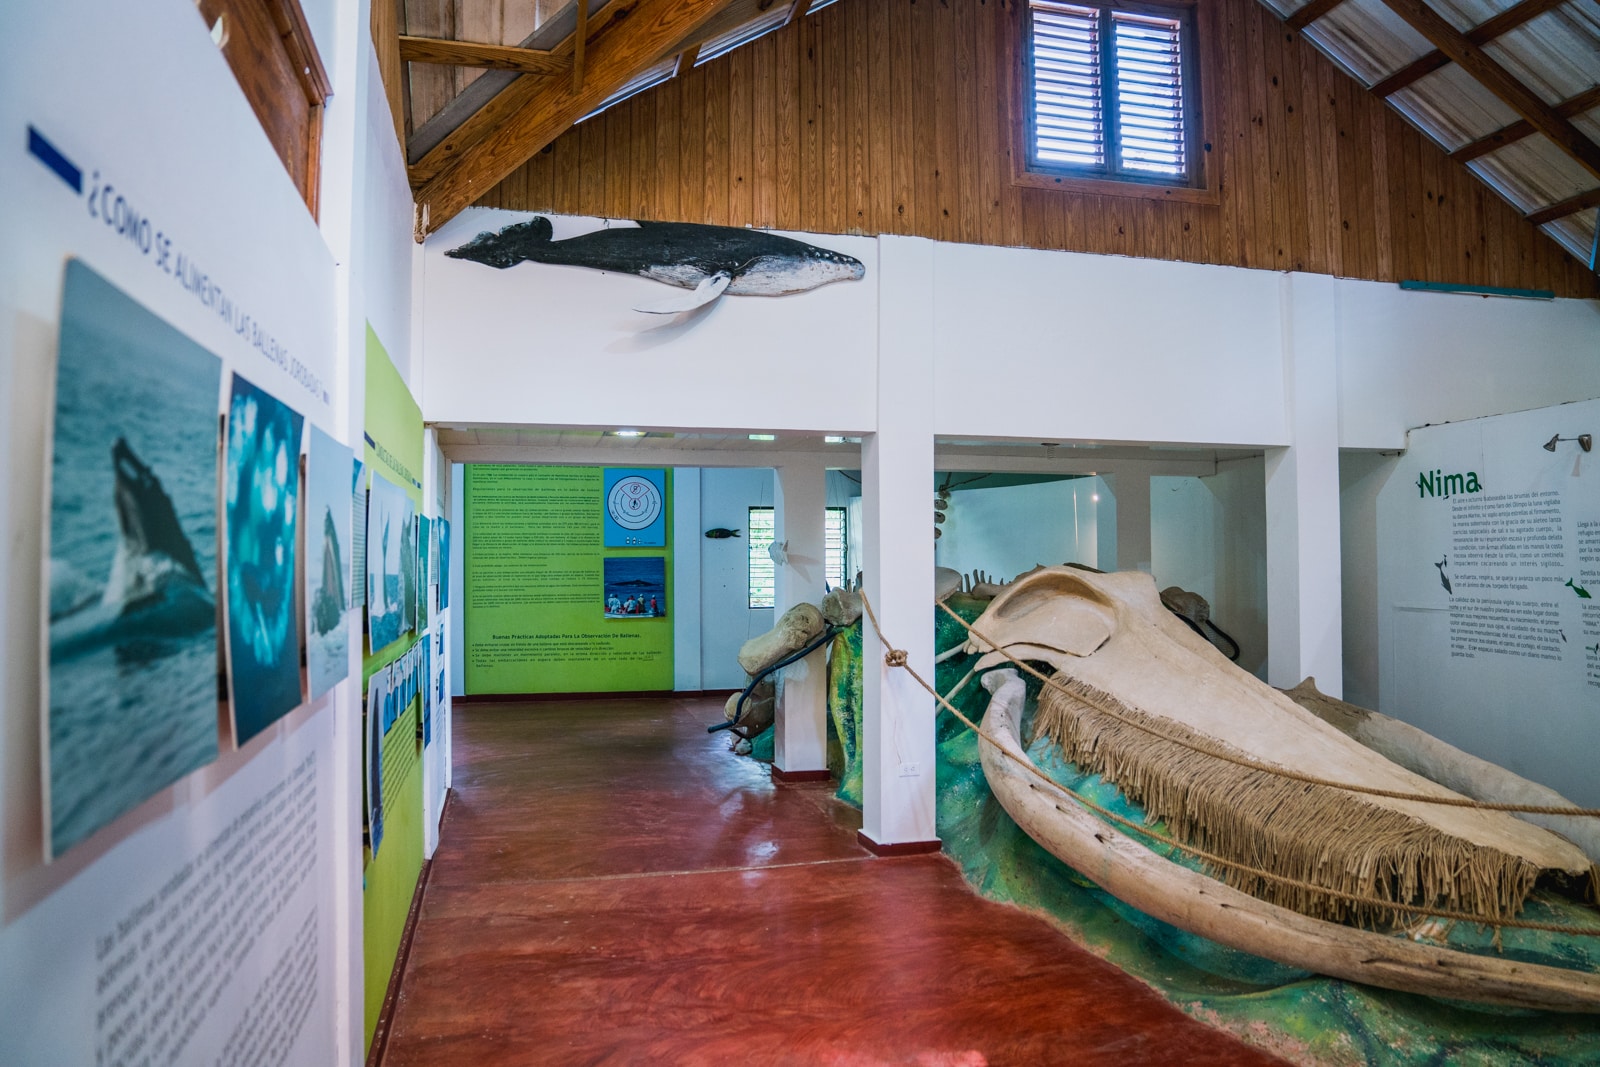 Interior of Whale Museum with exhibits on the walls and a large humpback whale skeleton